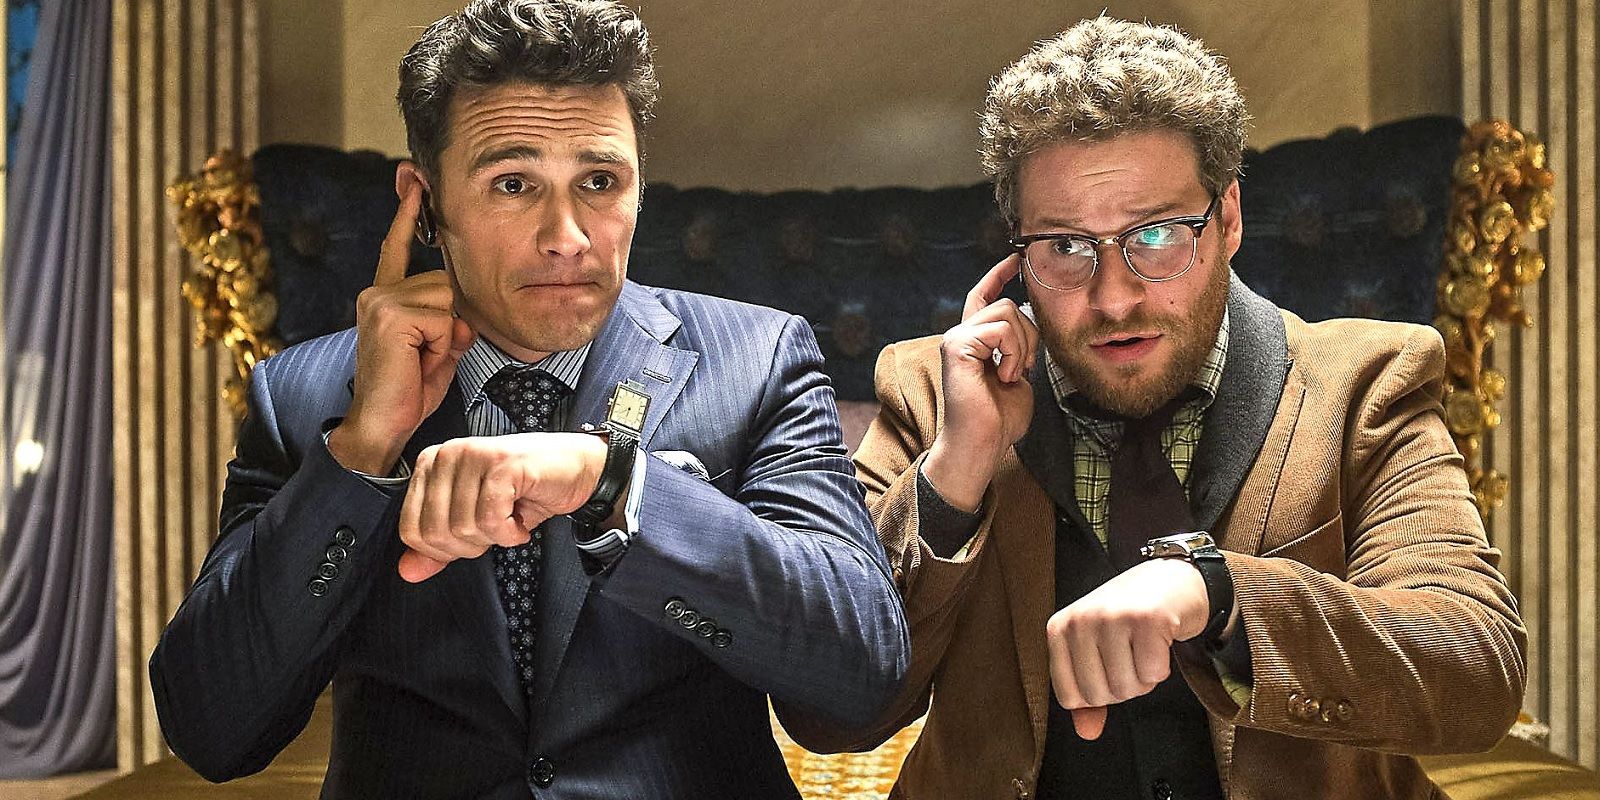 Seth Rogen And James Franco Movies Ranked From Worst To Best